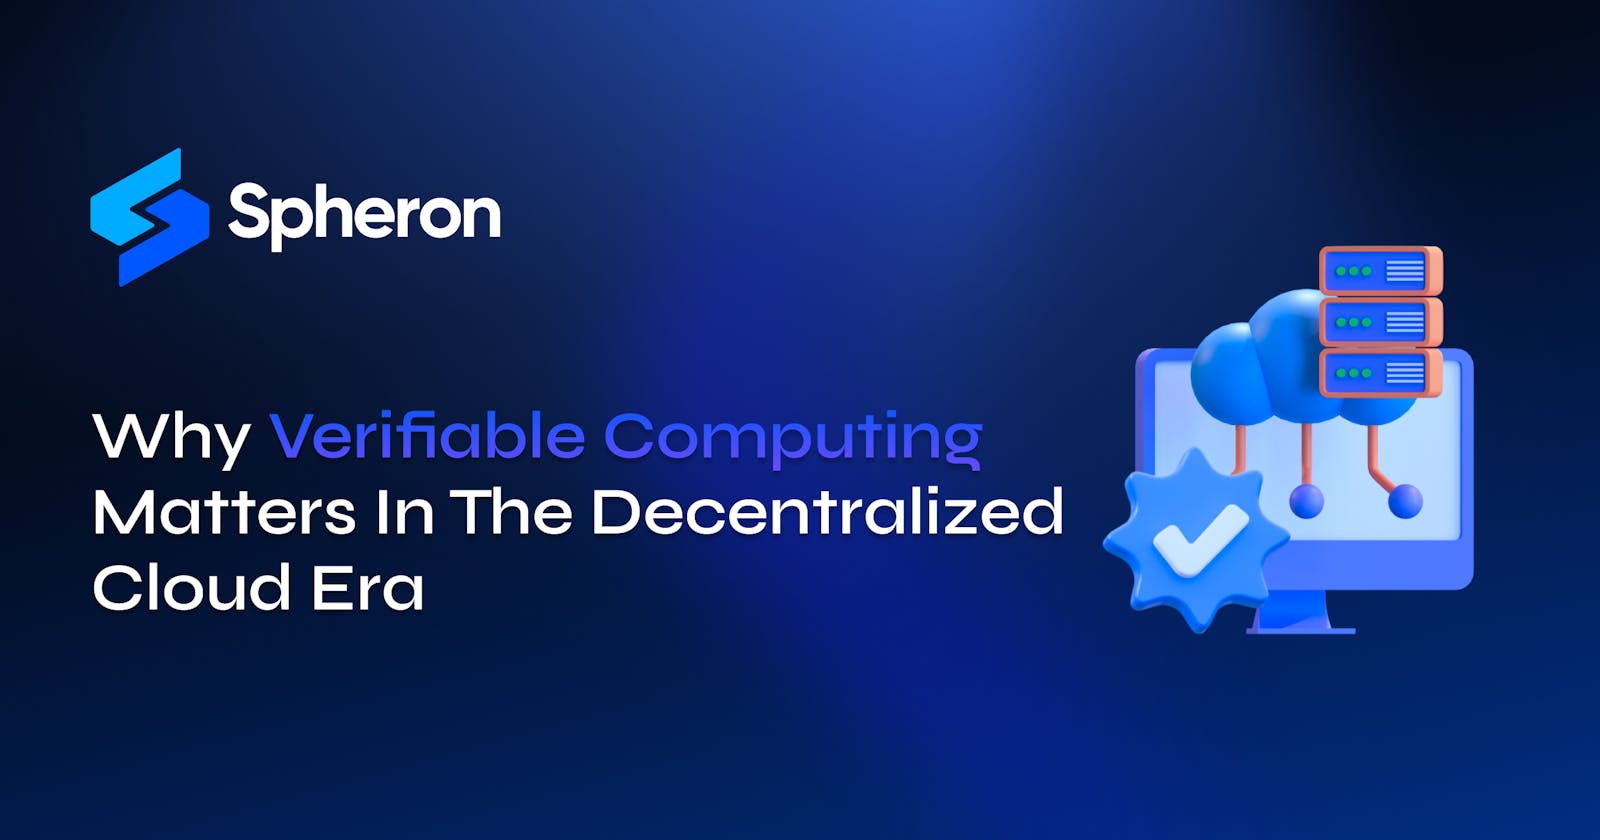 Why Verifiable Computing Matters In The Decentralized Cloud Era?